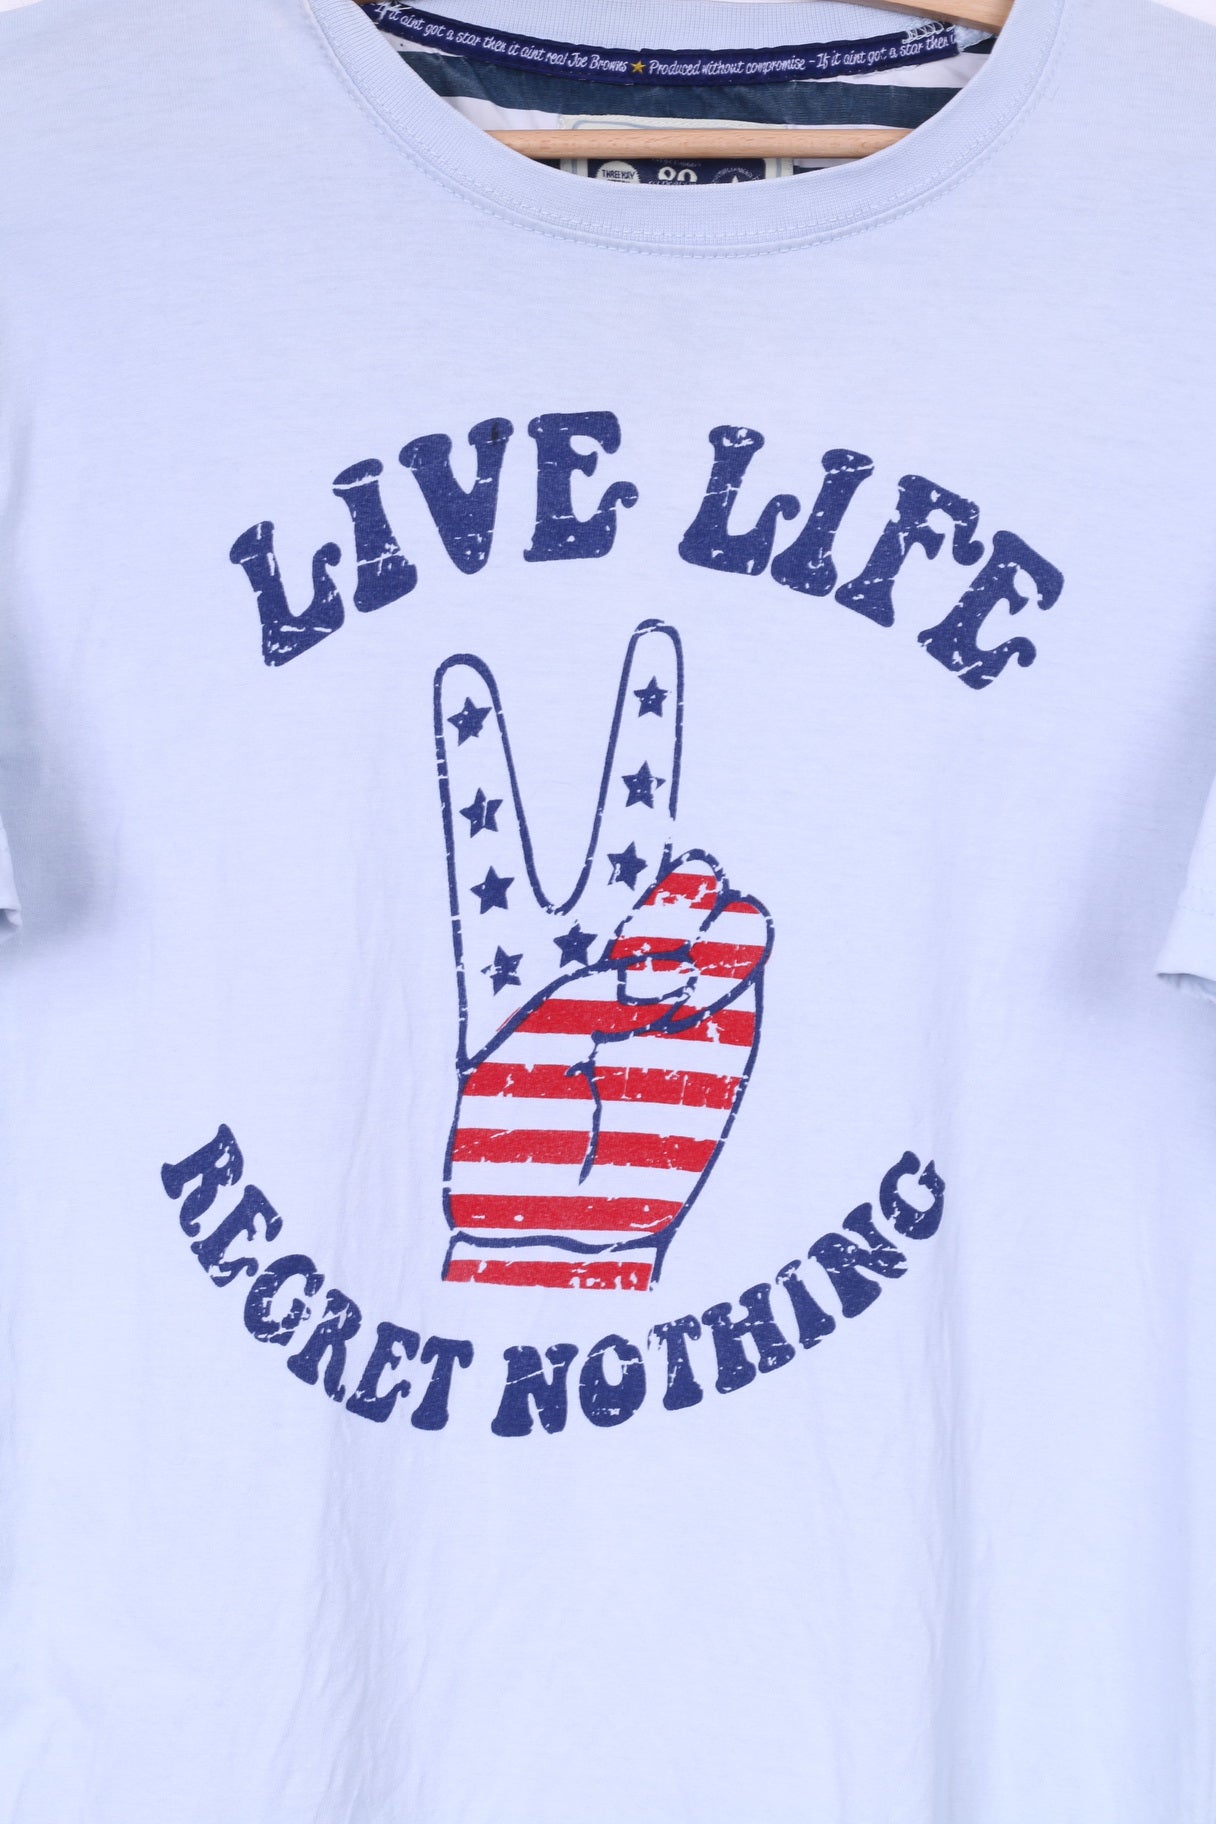 Joe Browns Dynamic Tees Mens M T-Shirt Crew Neck Graphic Blue Live Life Regret Nothing